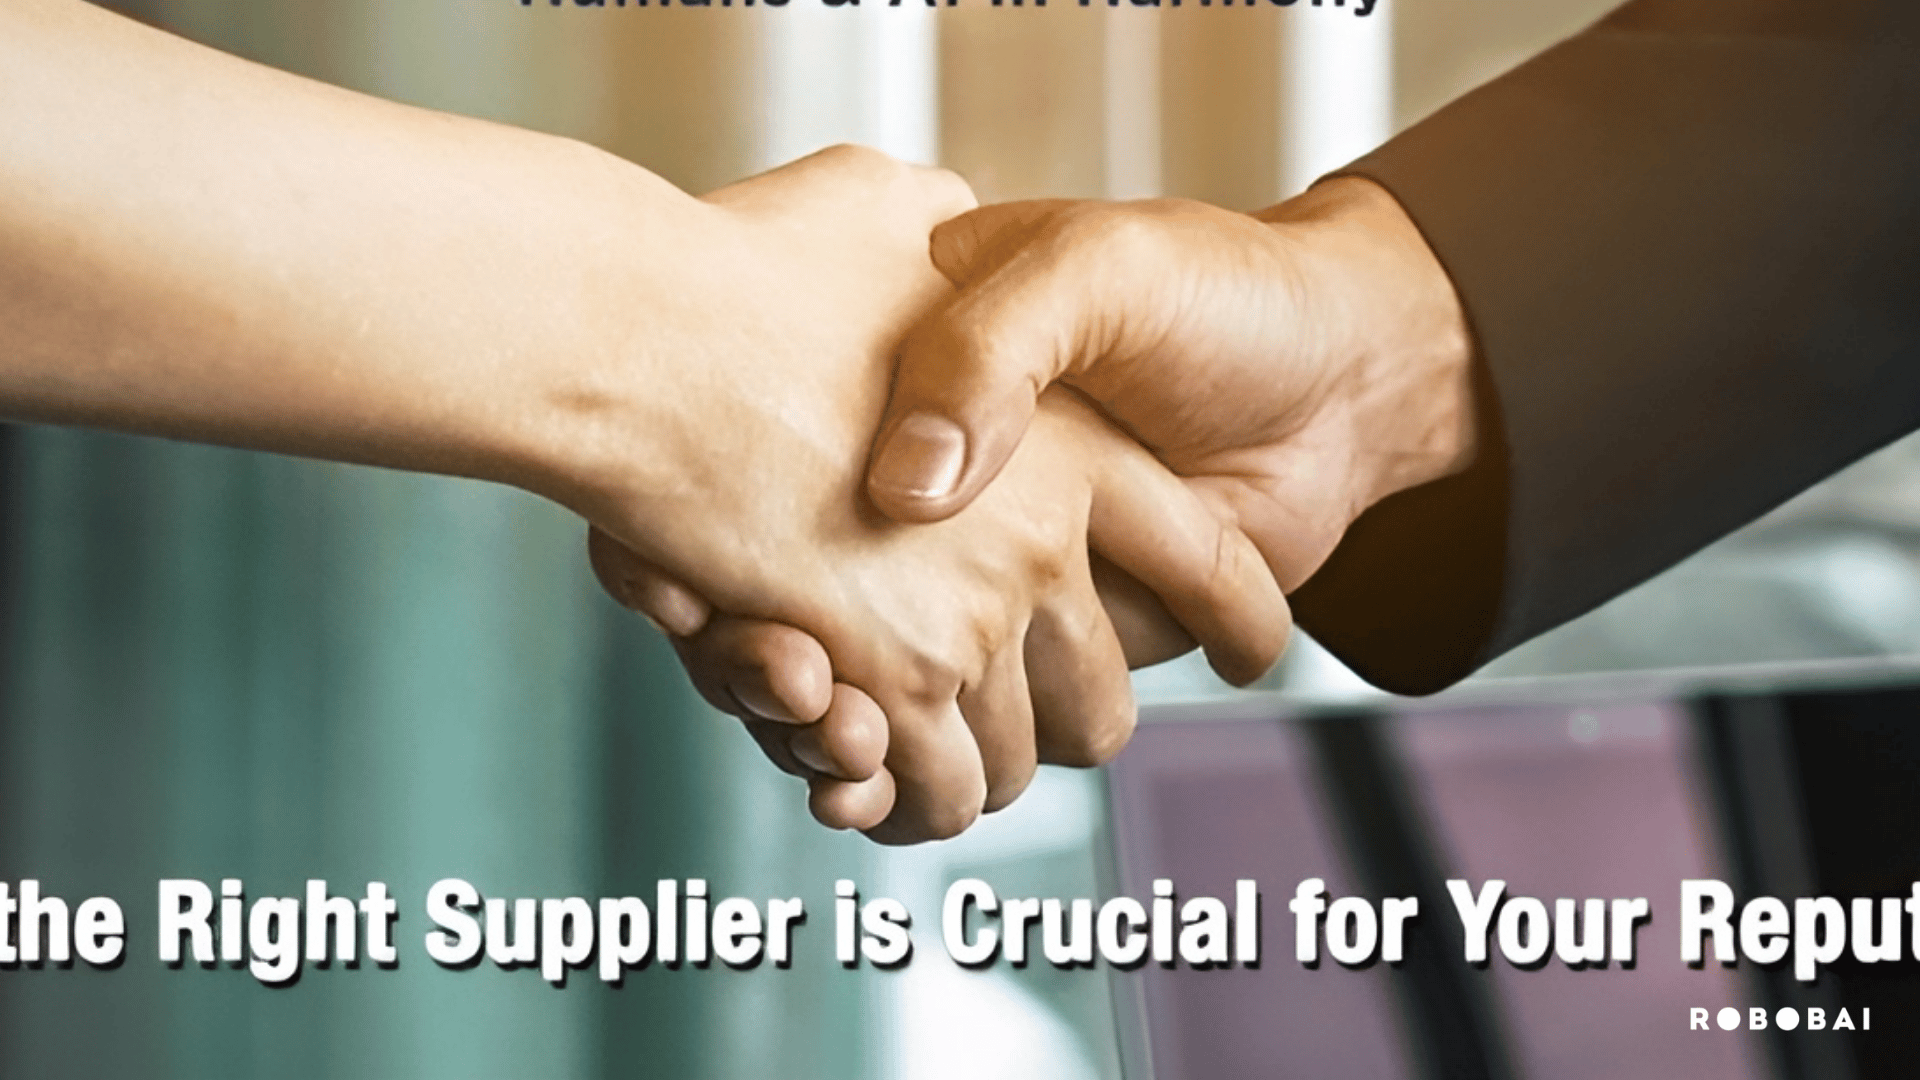 Why the right supplier is crucial for your reputation